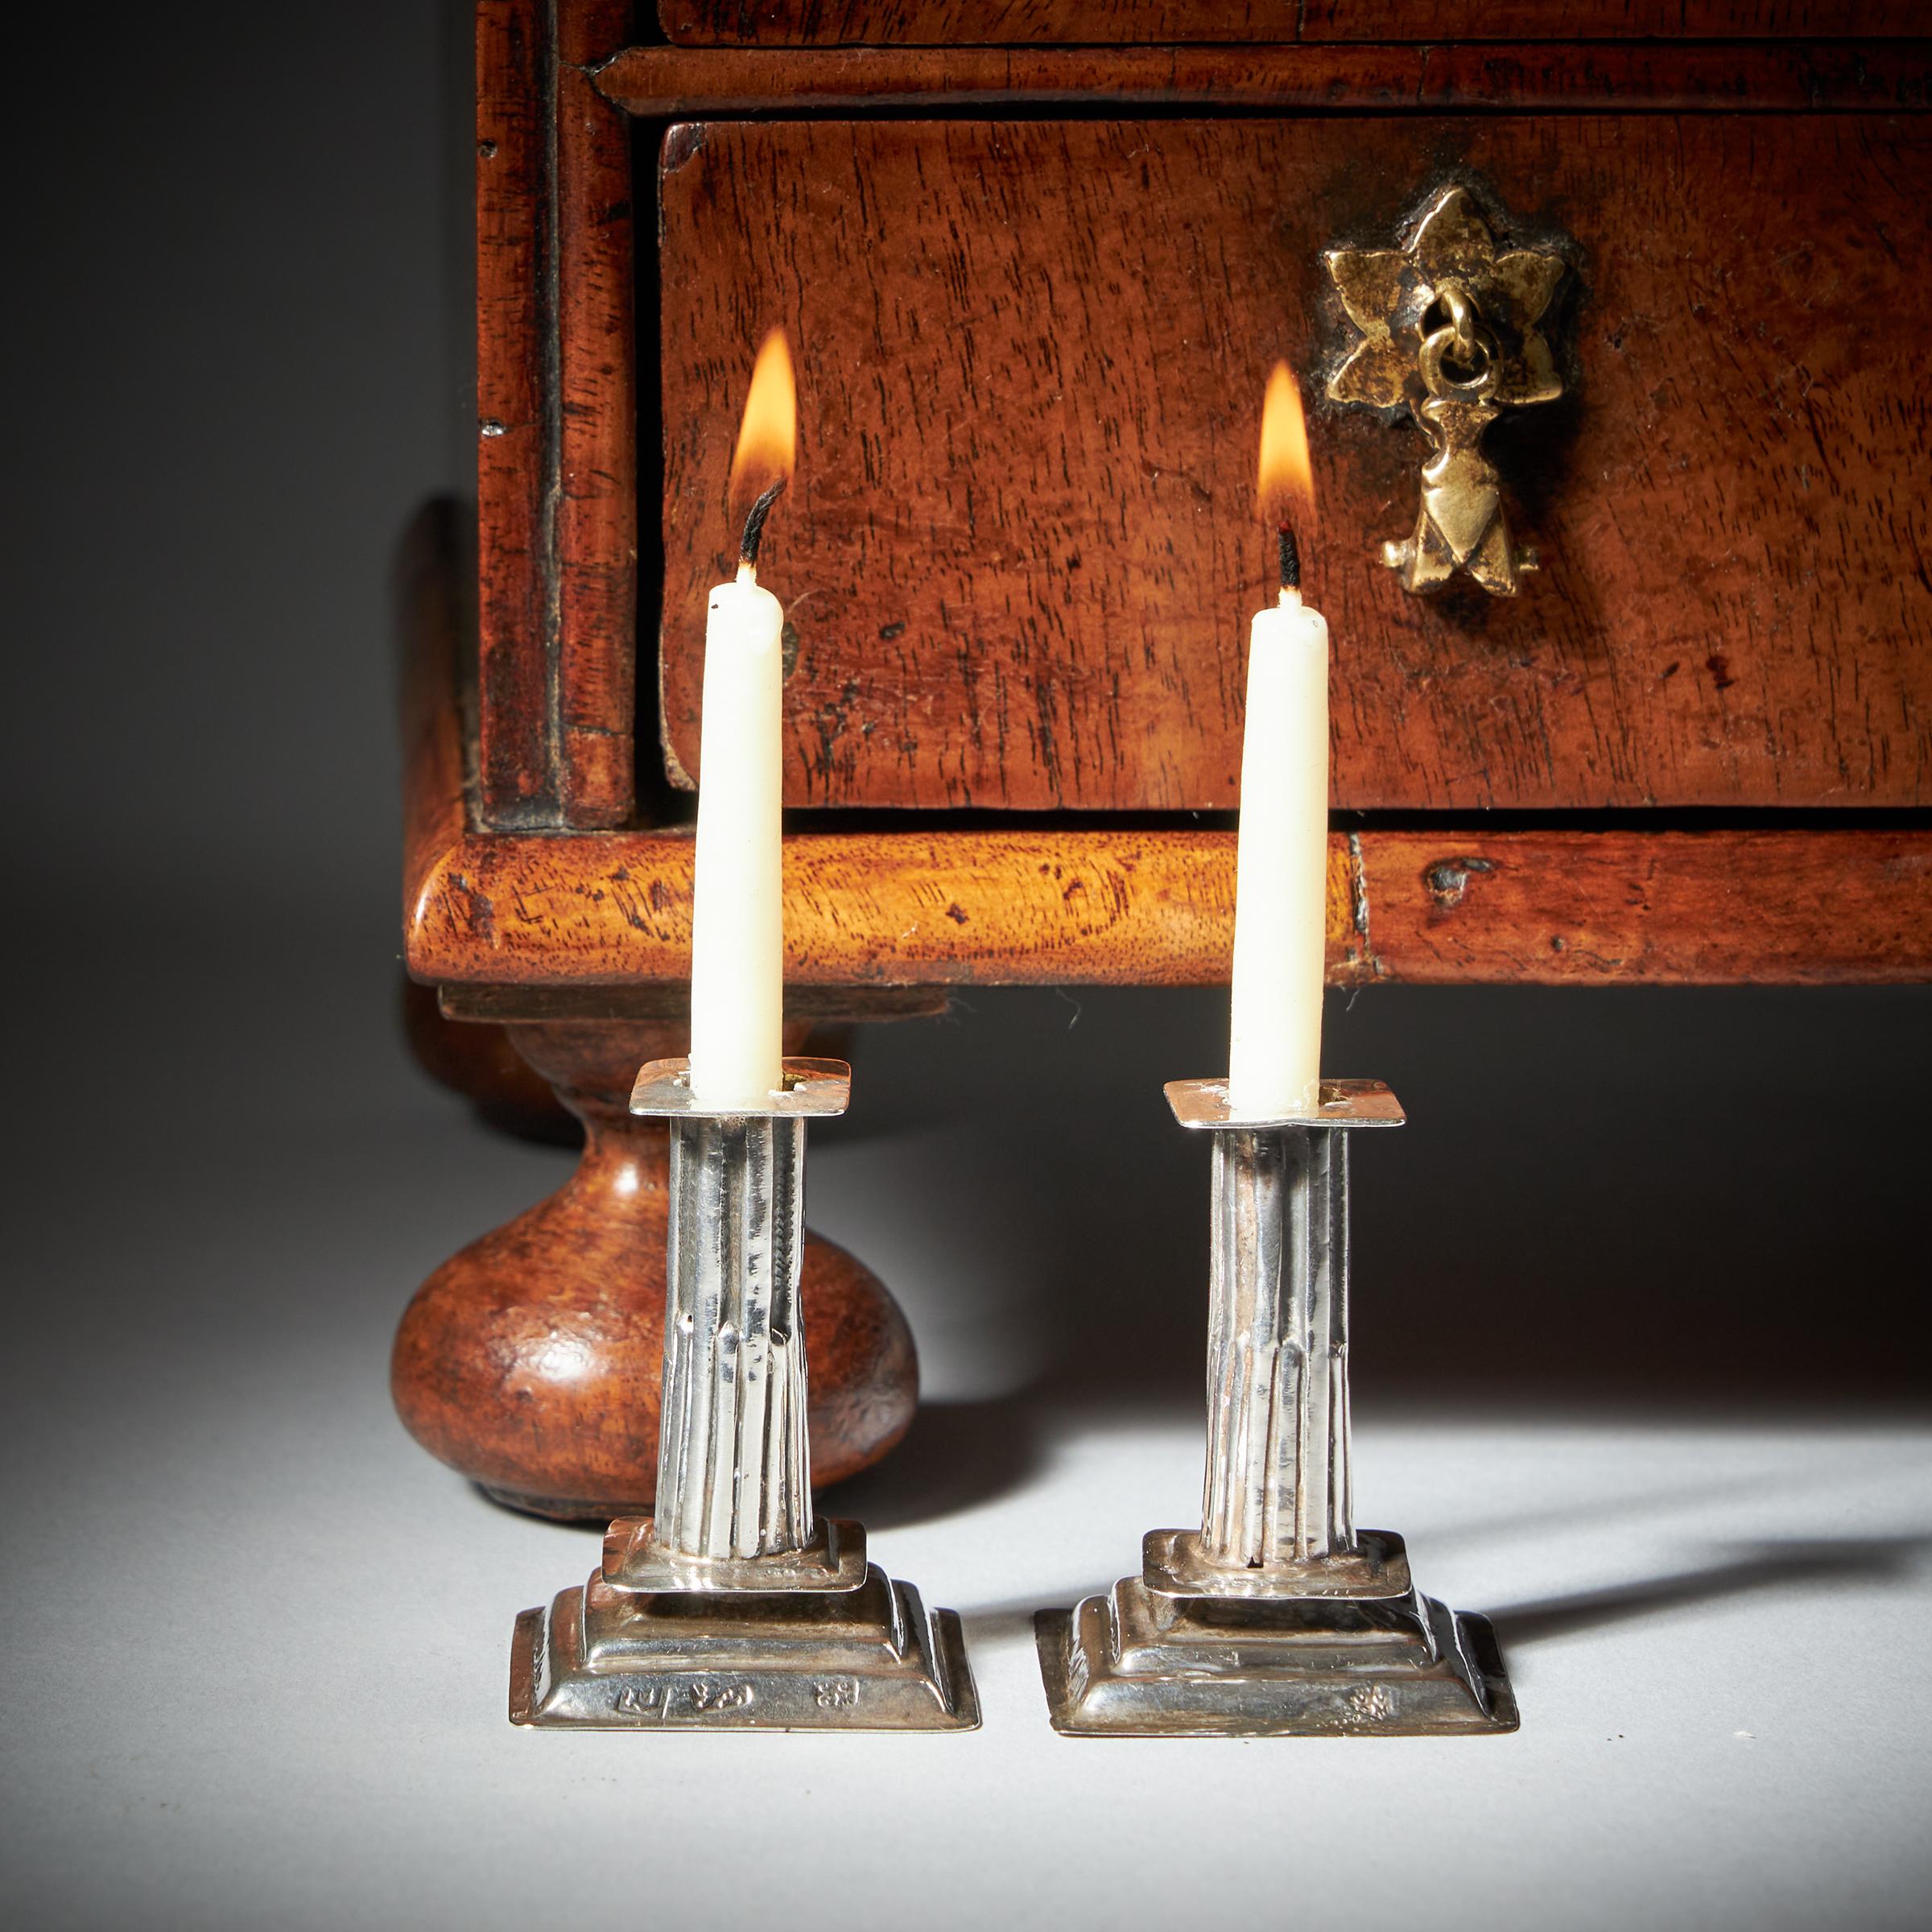 A Pair of 17th Century William and Mary Miniature Candlesticks By George Manjoy For Sale 2